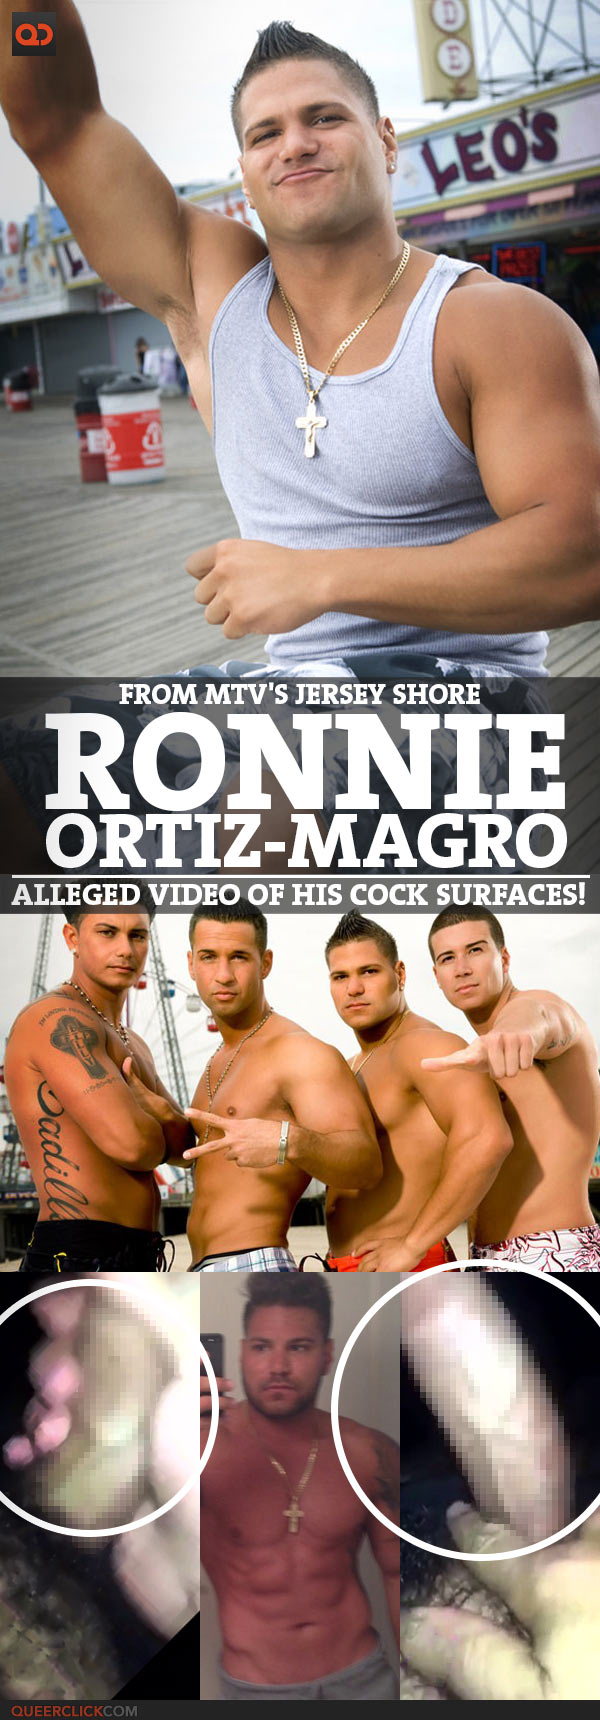 Ronnie Ortiz-Magro, From MTV'S Jersey Shore, Alleged Video Of His Cock  Surfaces! - QueerClick